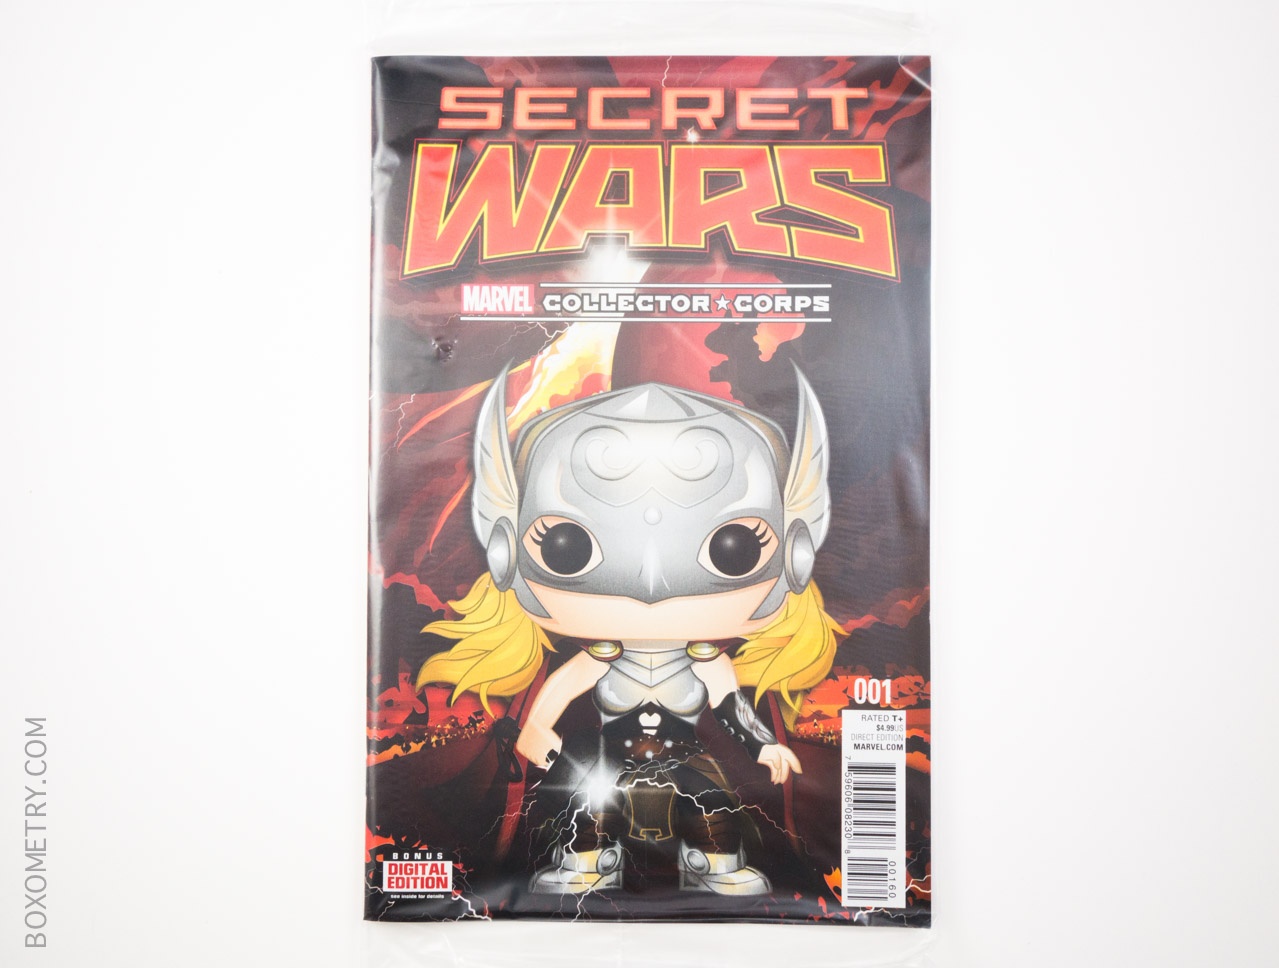 Boxometry Marvel Collector Corps August 2015 Review - Secret Wars 001 Exclusive Variant Edition